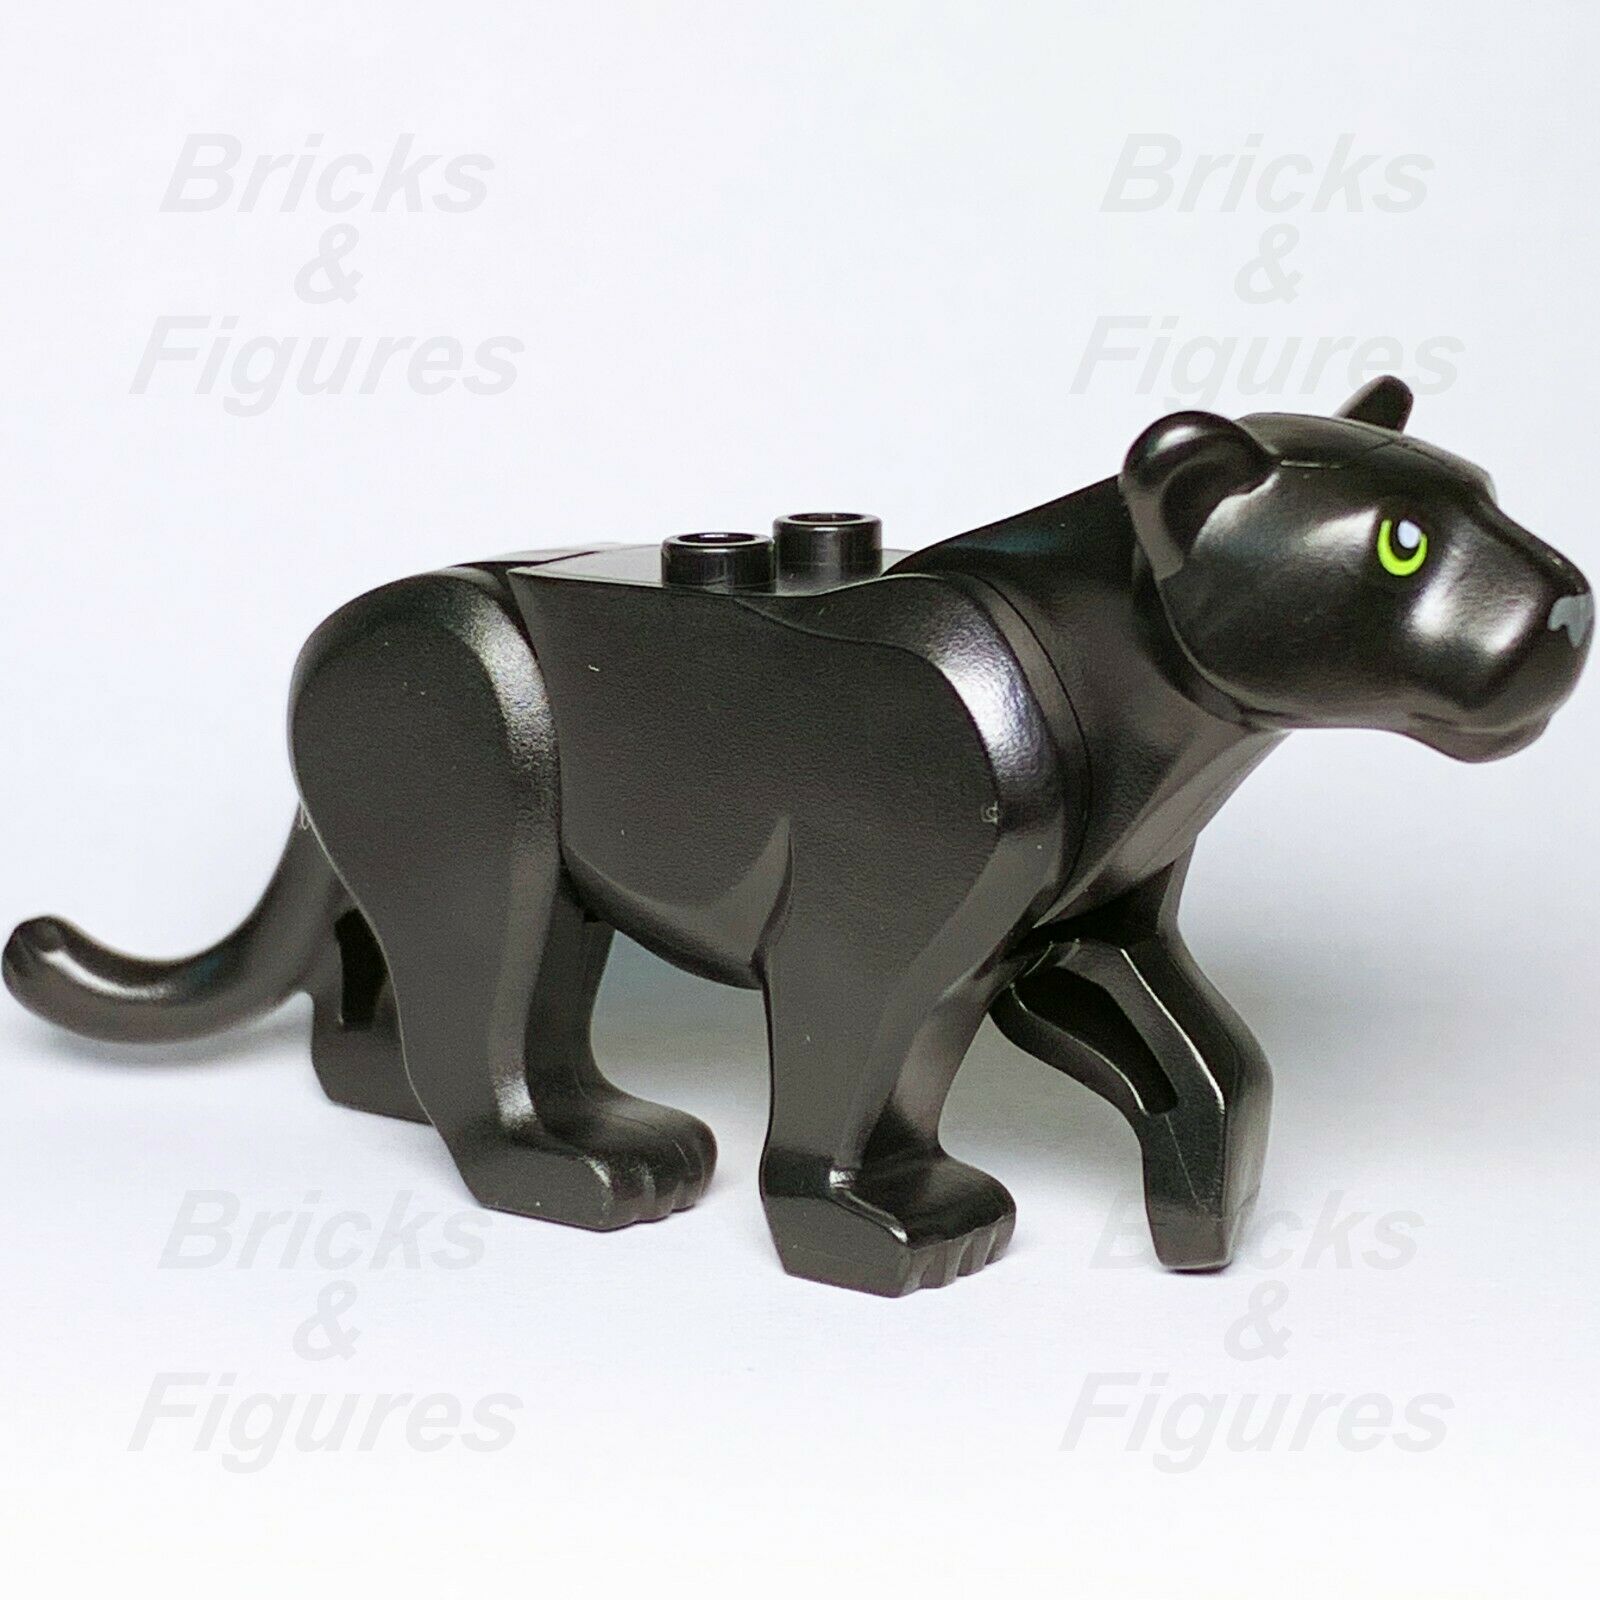 New Town City Jungle LEGO Black Panther Large Cat Animal from set 60159 Genuine - Bricks & Figures